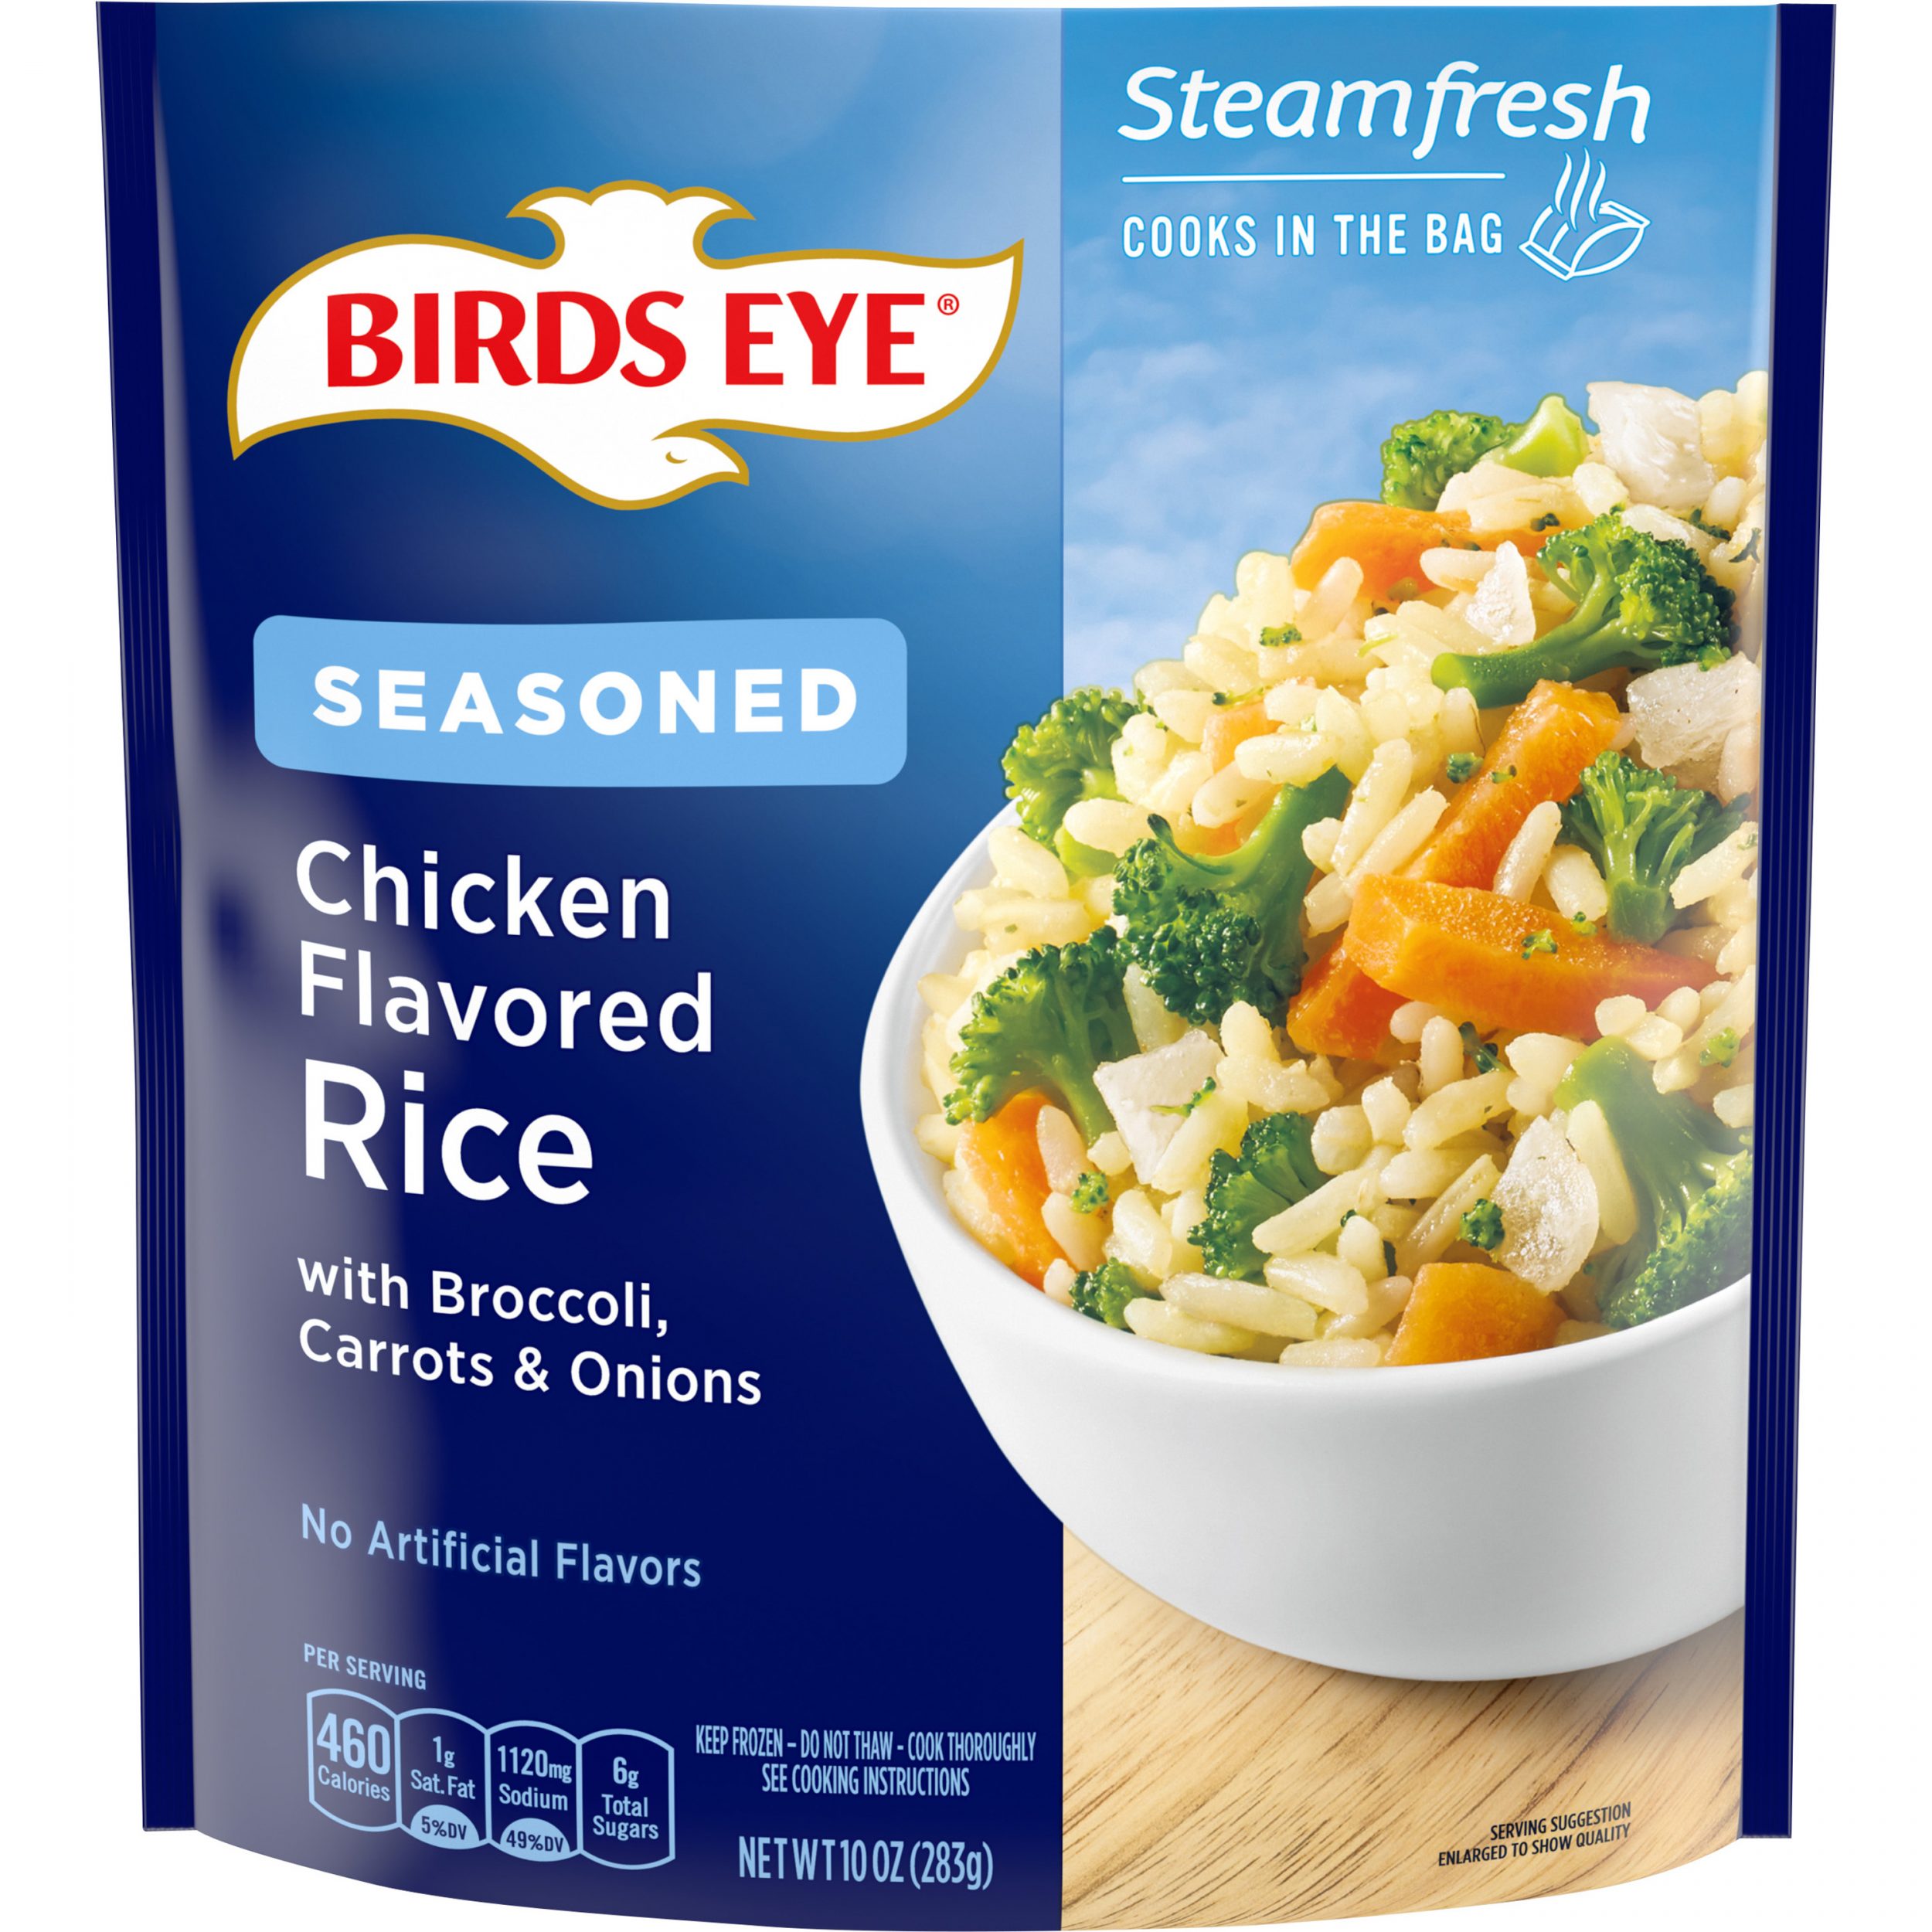 Birds Eye Steamfresh Chef’s Favorites Lightly Seasoned Chicken Flavored Rice with Broccoli, Carrots & Onions